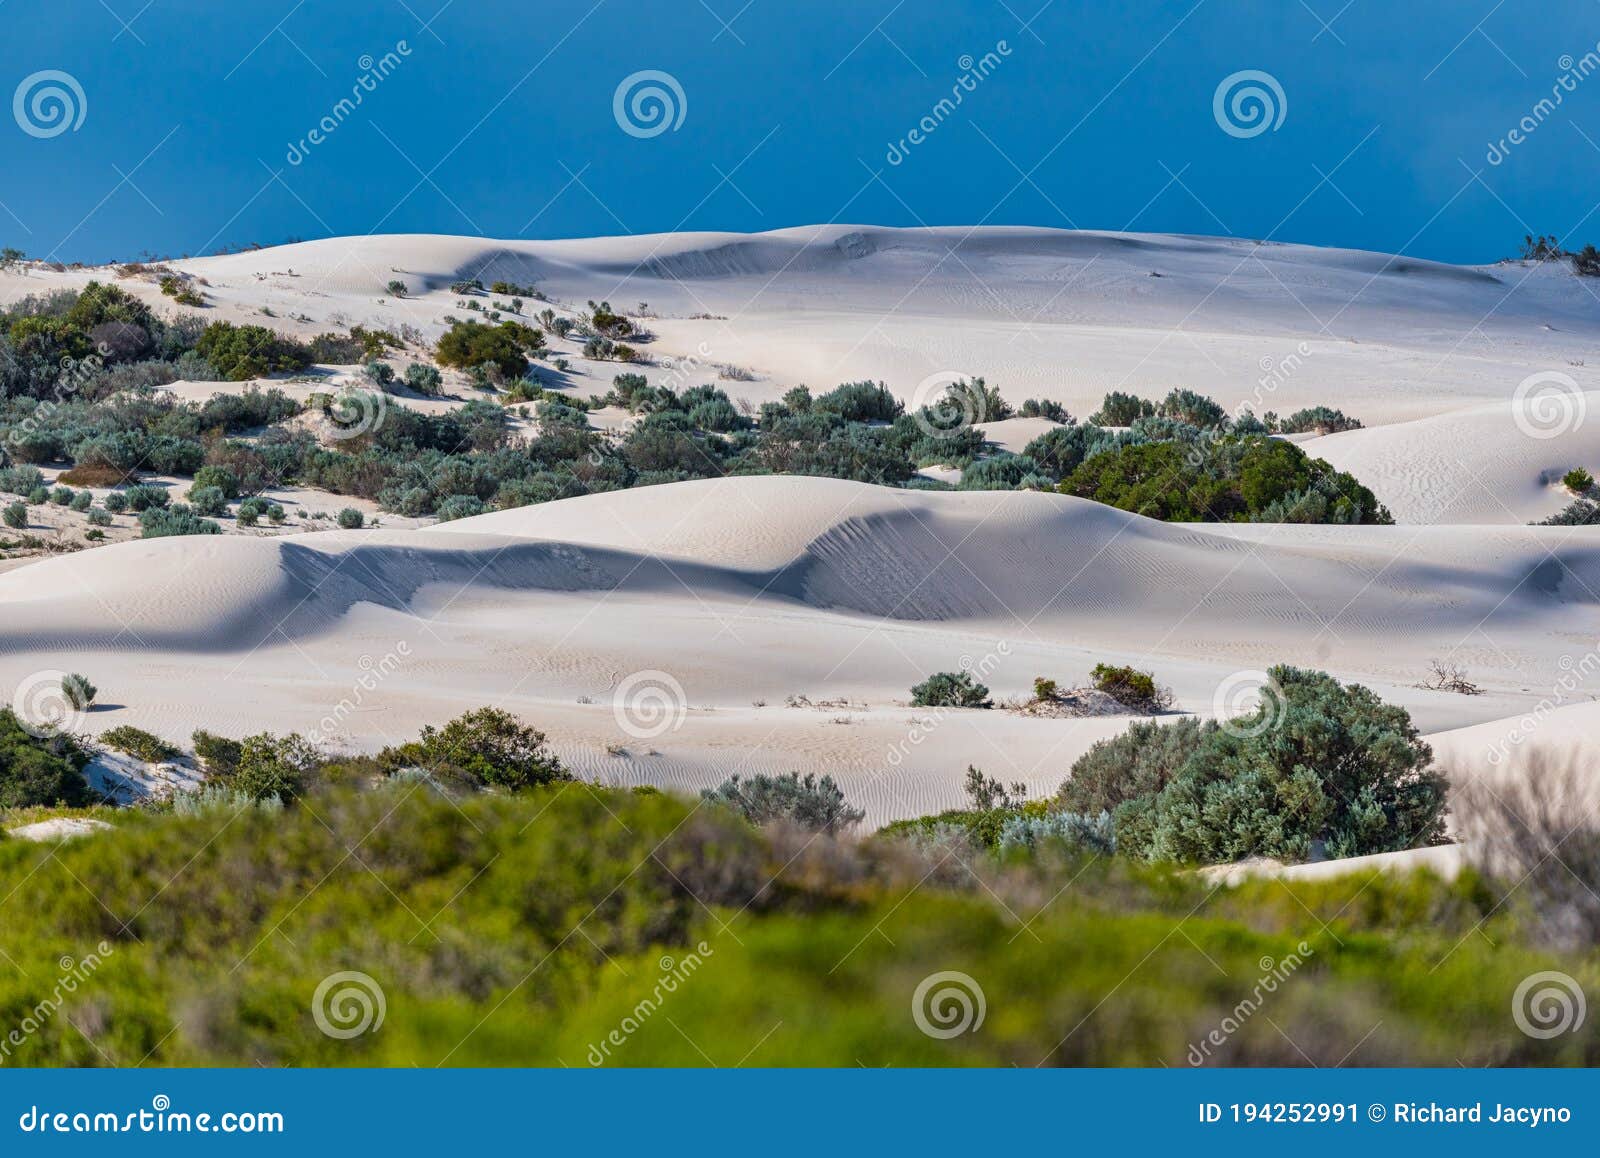 lancelin is australia`s premier sandboarding destination. pure white sand rises three storeys high and entry to the dunes is free